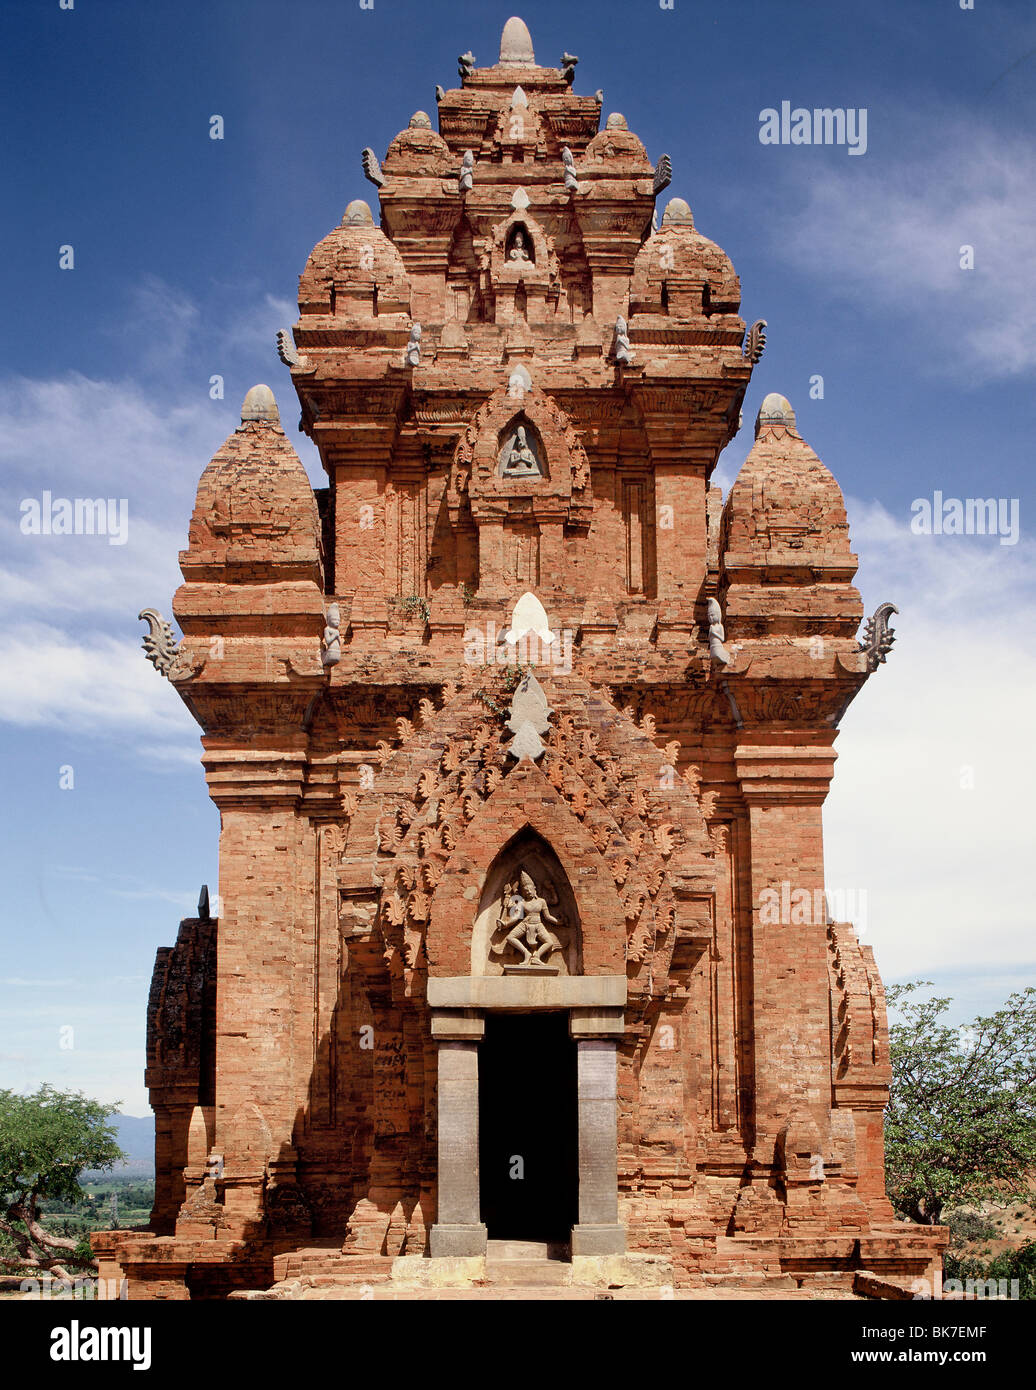 Cham temple of Po Klong Garai, dating from the 15th century, Vietnam, Indochina, Southeast Asia, Asia Stock Photo